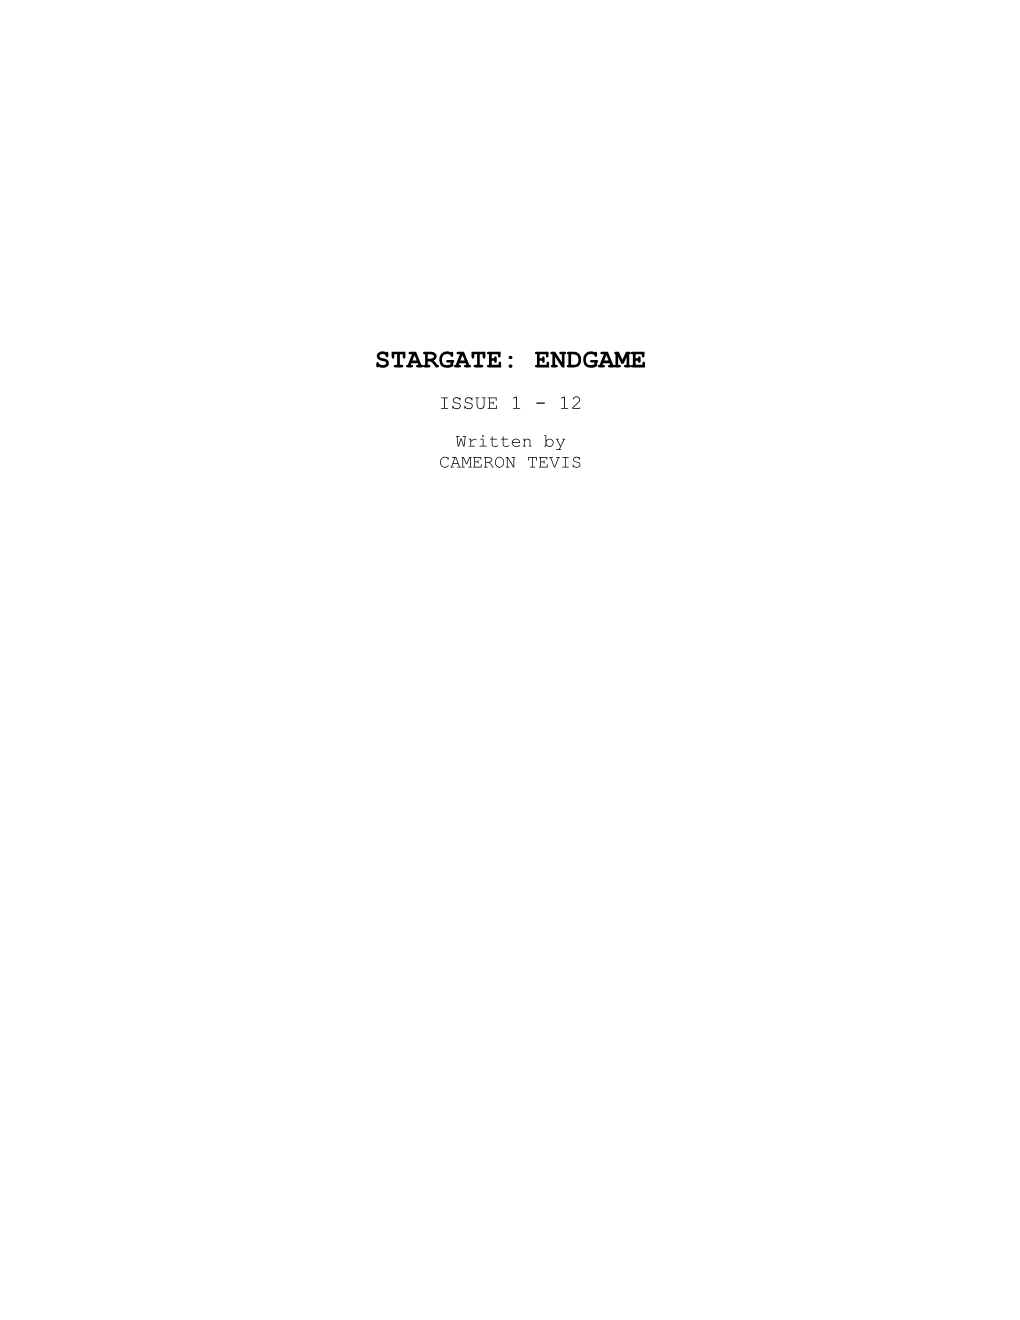 STARGATE: ENDGAME ISSUE 1 - 12 Written by CAMERON TEVIS